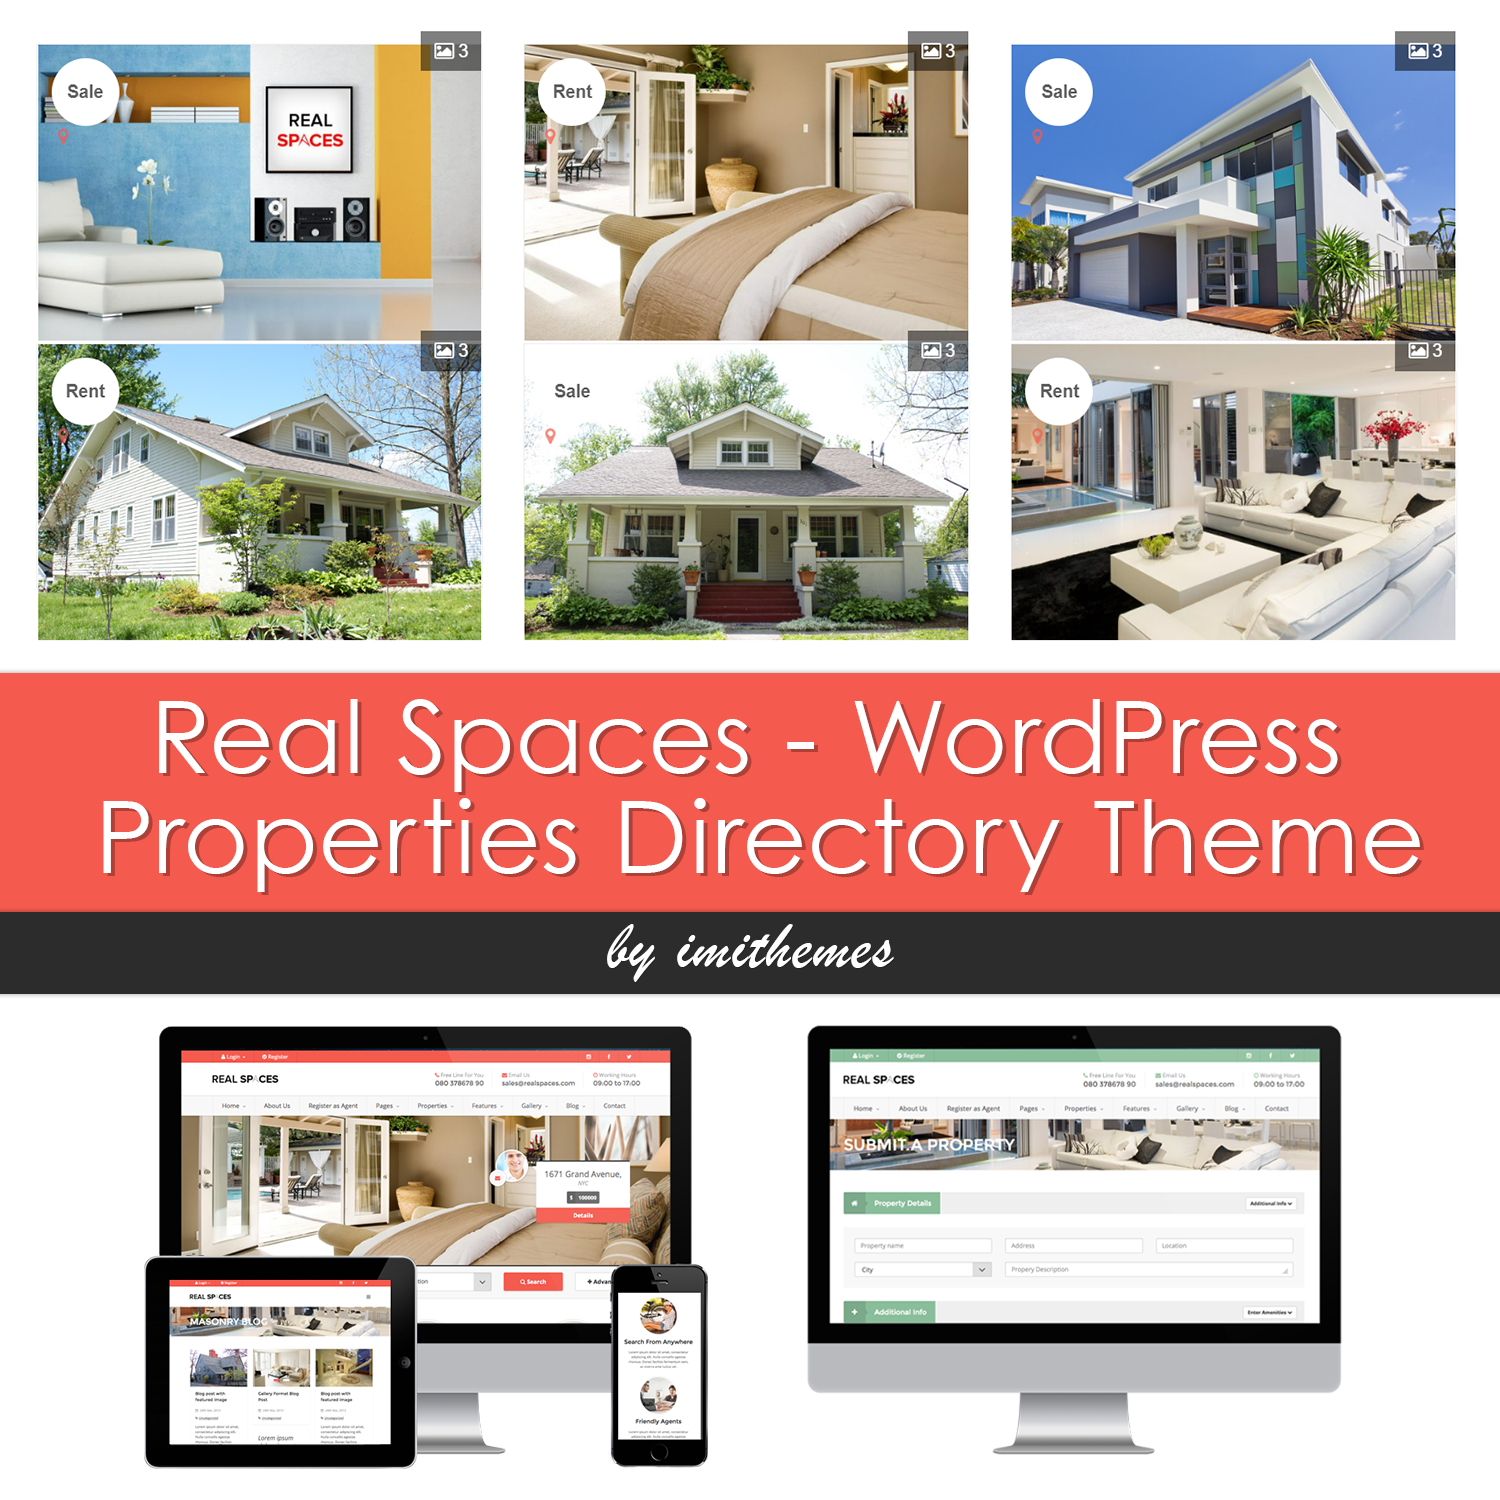 Images with real spaces wordpress properties directory theme.